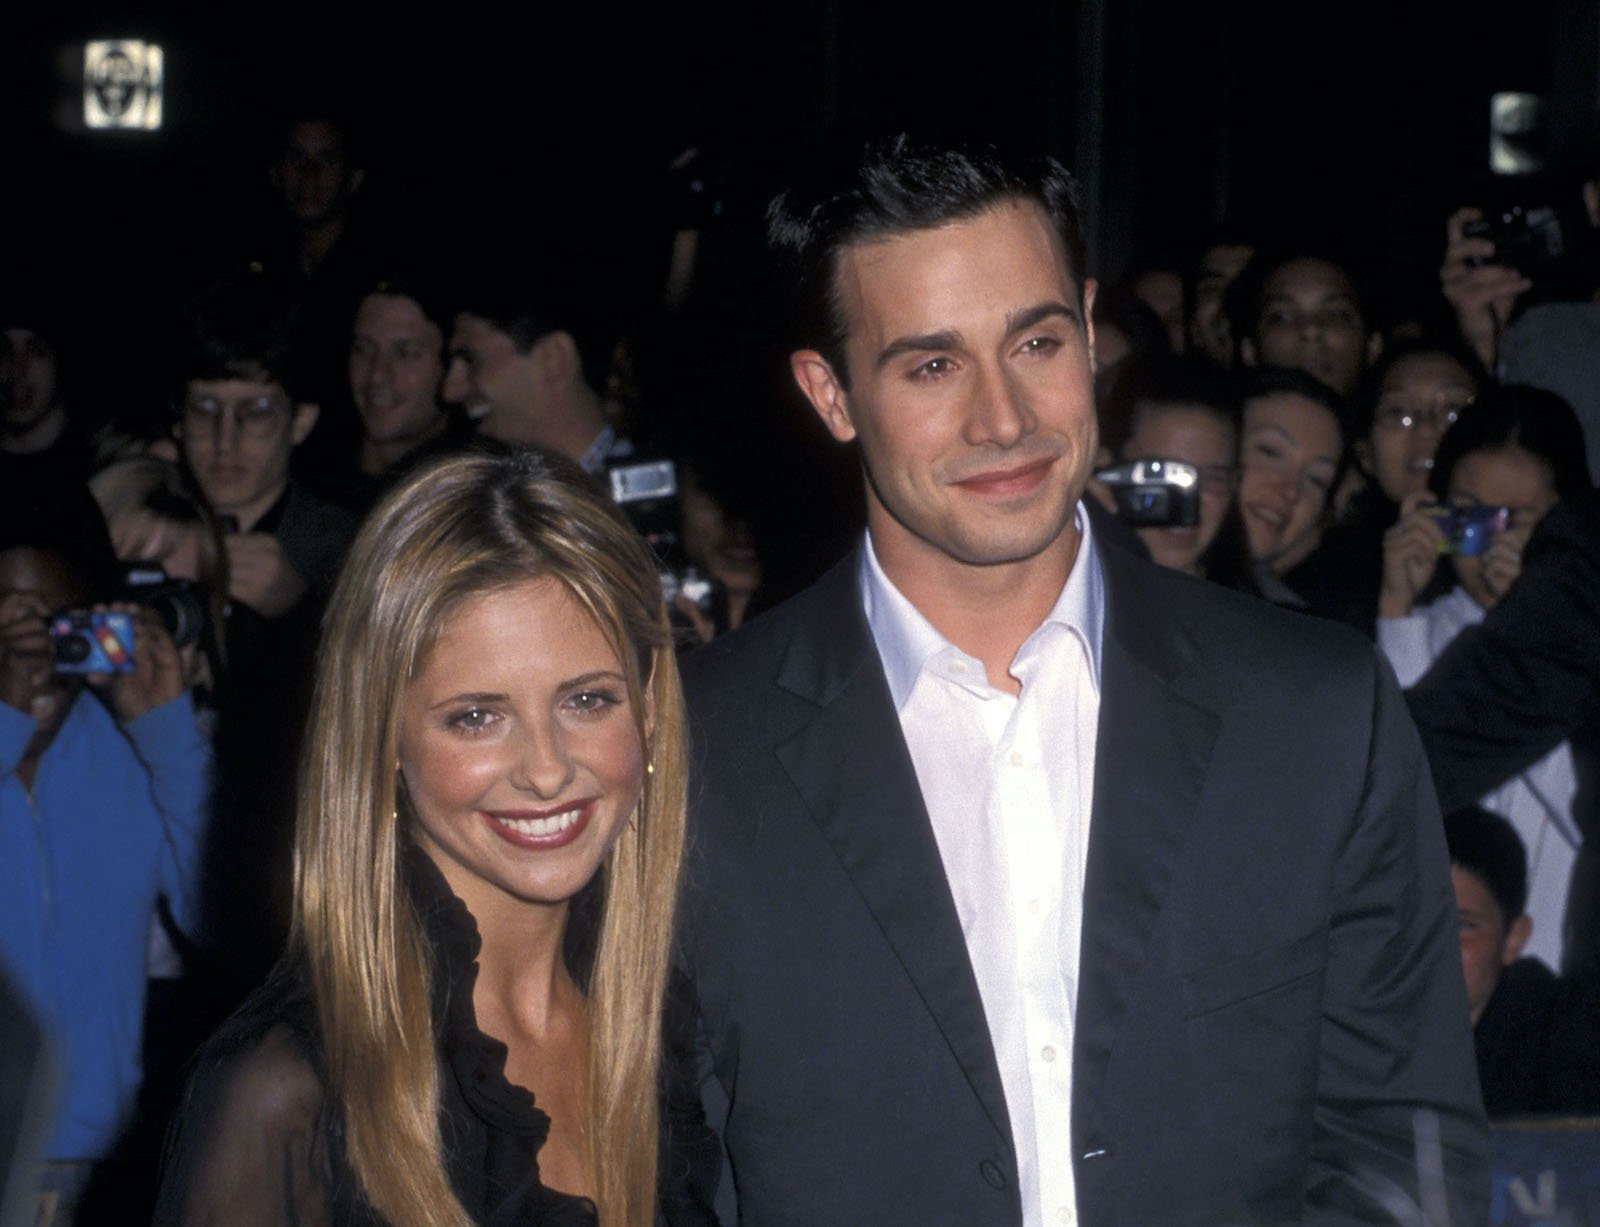 Sarah Michelle Gellar and Freddie Prinze Jr. at the premiere of 'Boys and Girls' in 2000